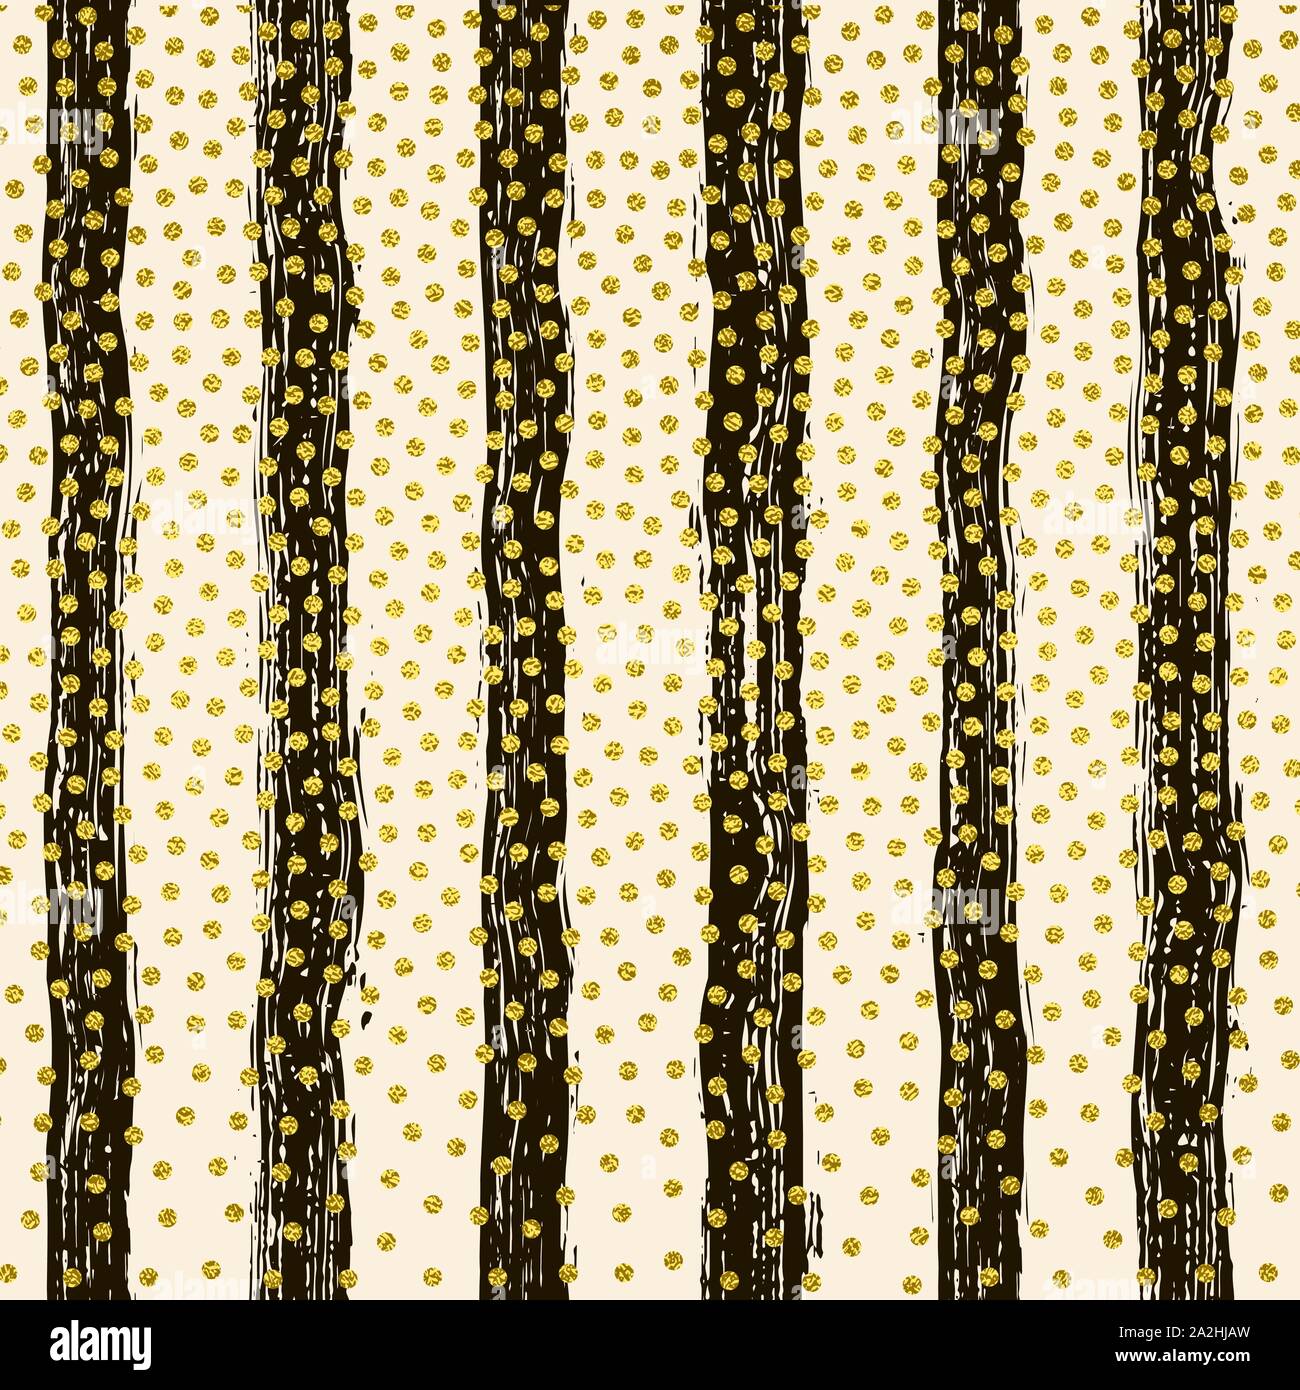 Striped seamless pattern with vertical line. Black and gold fashion graphics design. Strict graphic background. Retro style. Template for wallpaper, wrapping, textile, fabric. Vector Illustration. Hand painted brush strokes. Striped background. Vector illustration. Gold circles Stock Vector